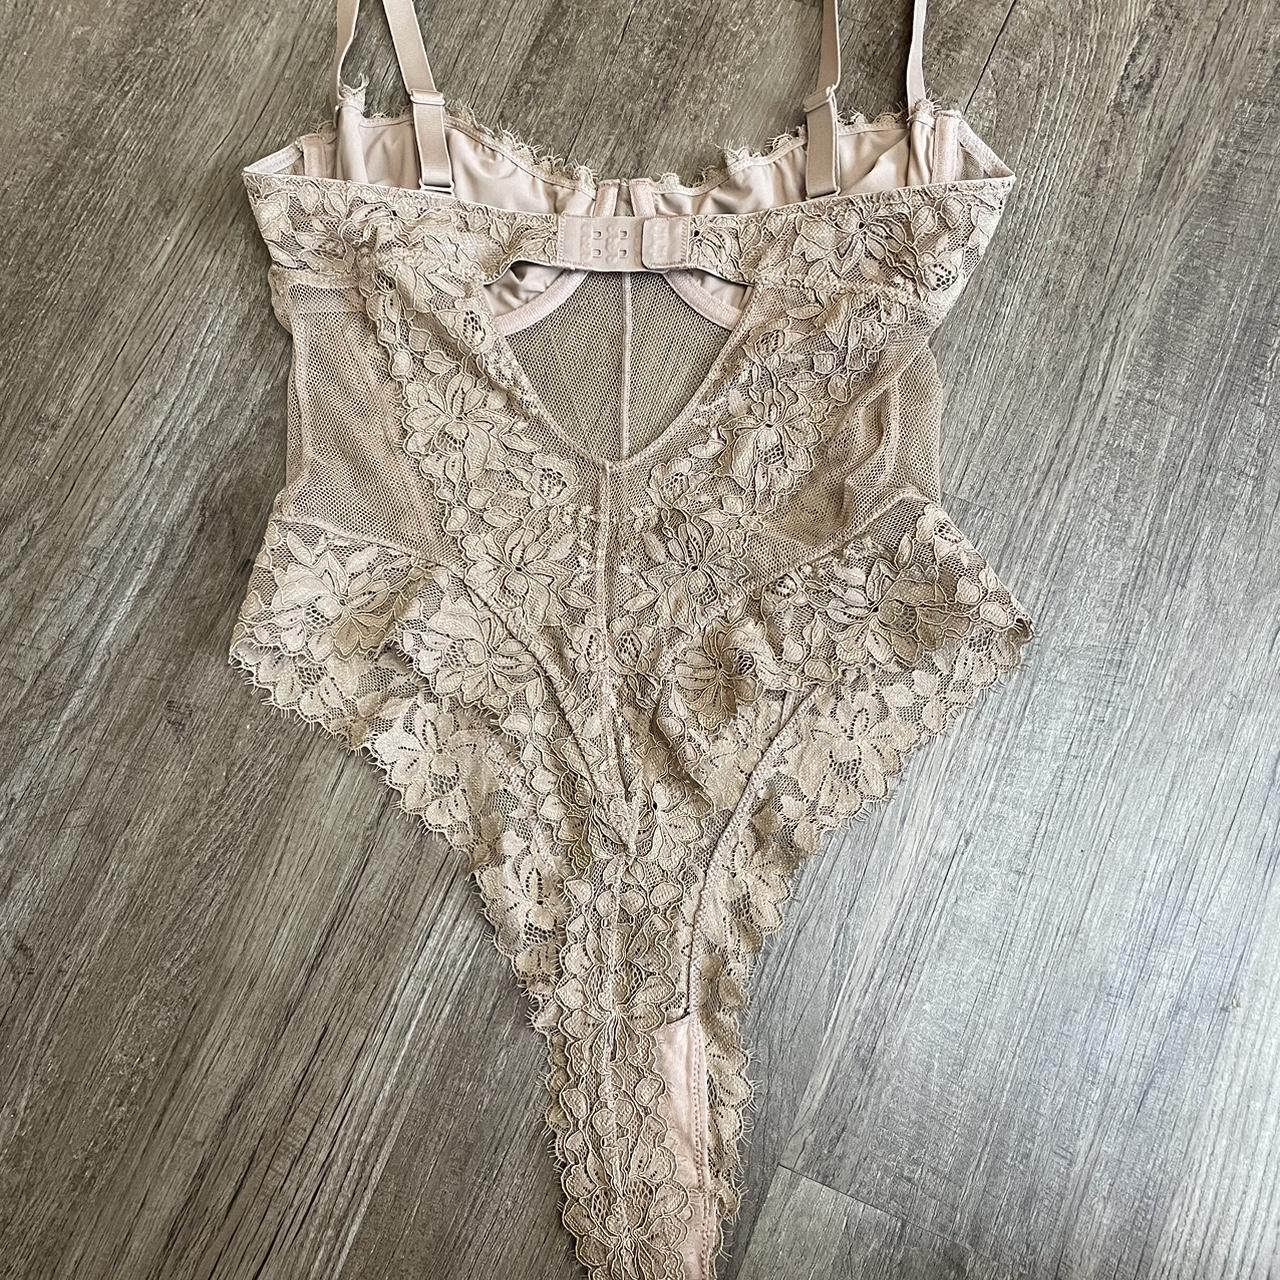 Skims Lace Lined Balconette Thong Bodysuit